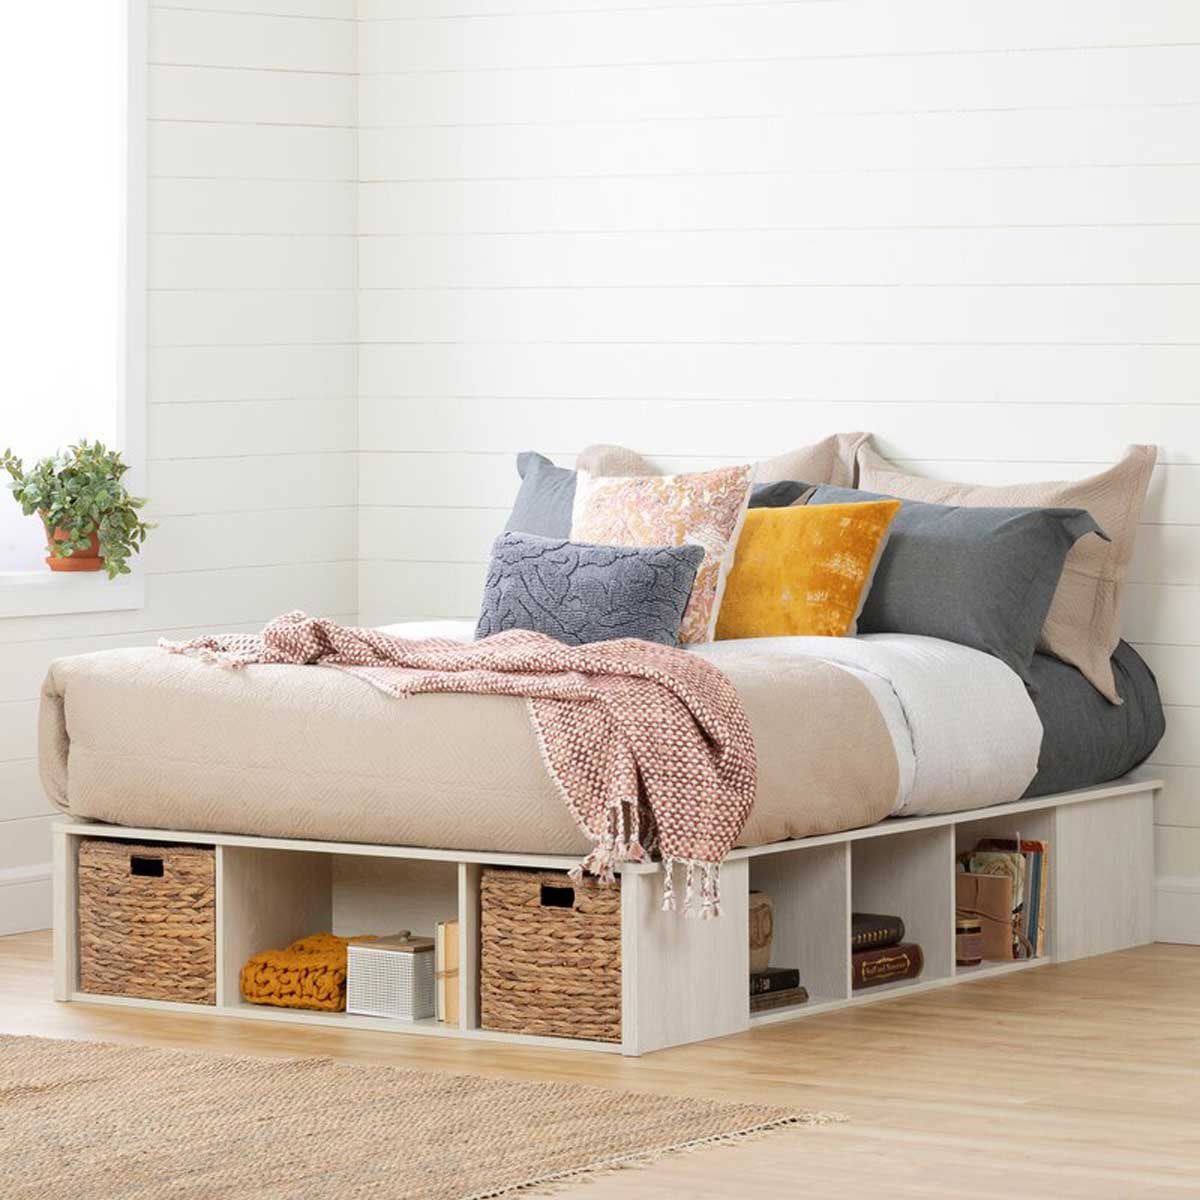 How To Build Platform Bed With Storage